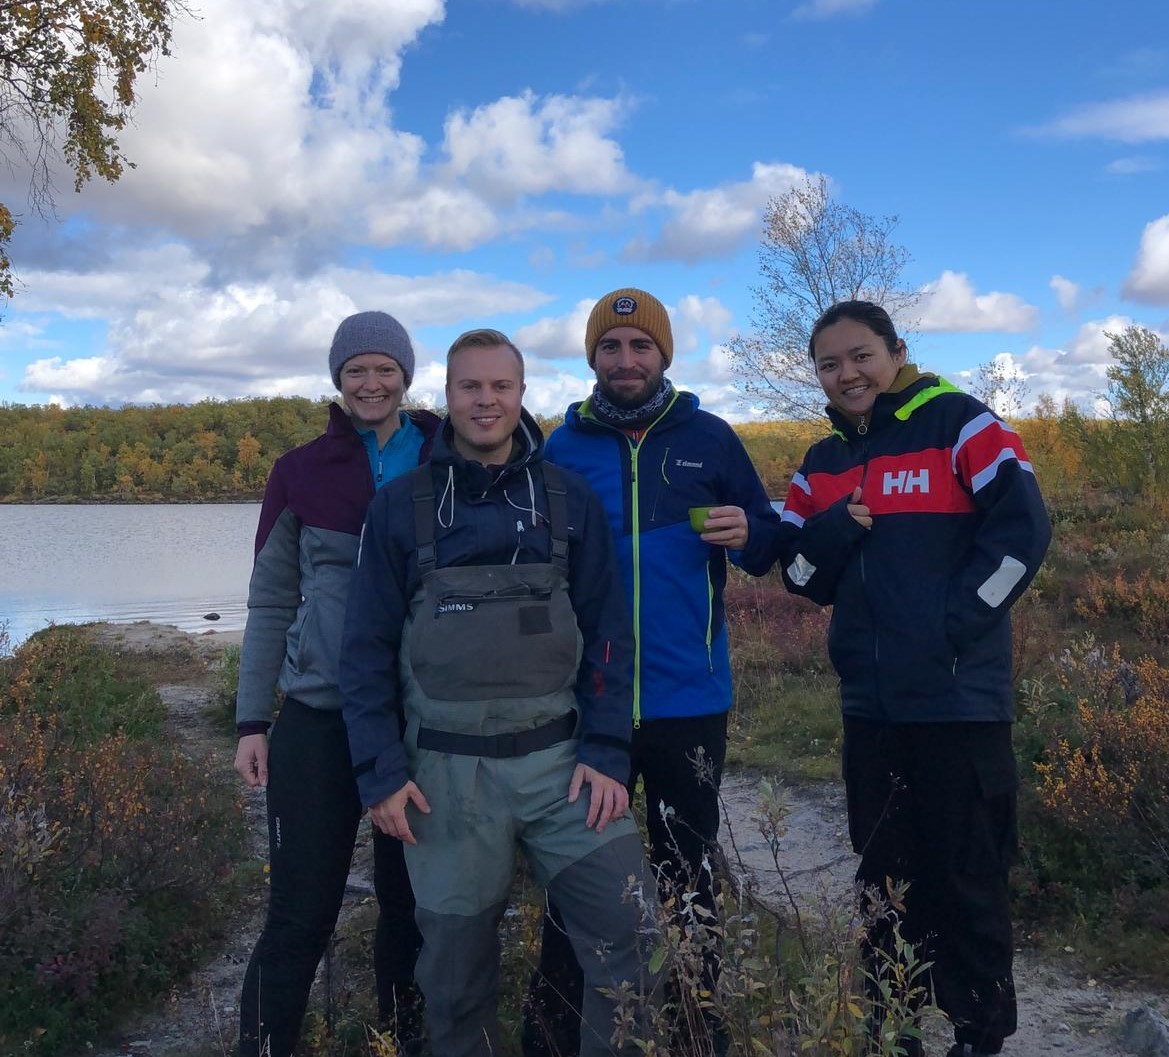 Lina Allesson, Even Werner, Nicolas Valiente and Jing Wei after collecting samples in Láhpojávri (Kautokeino).